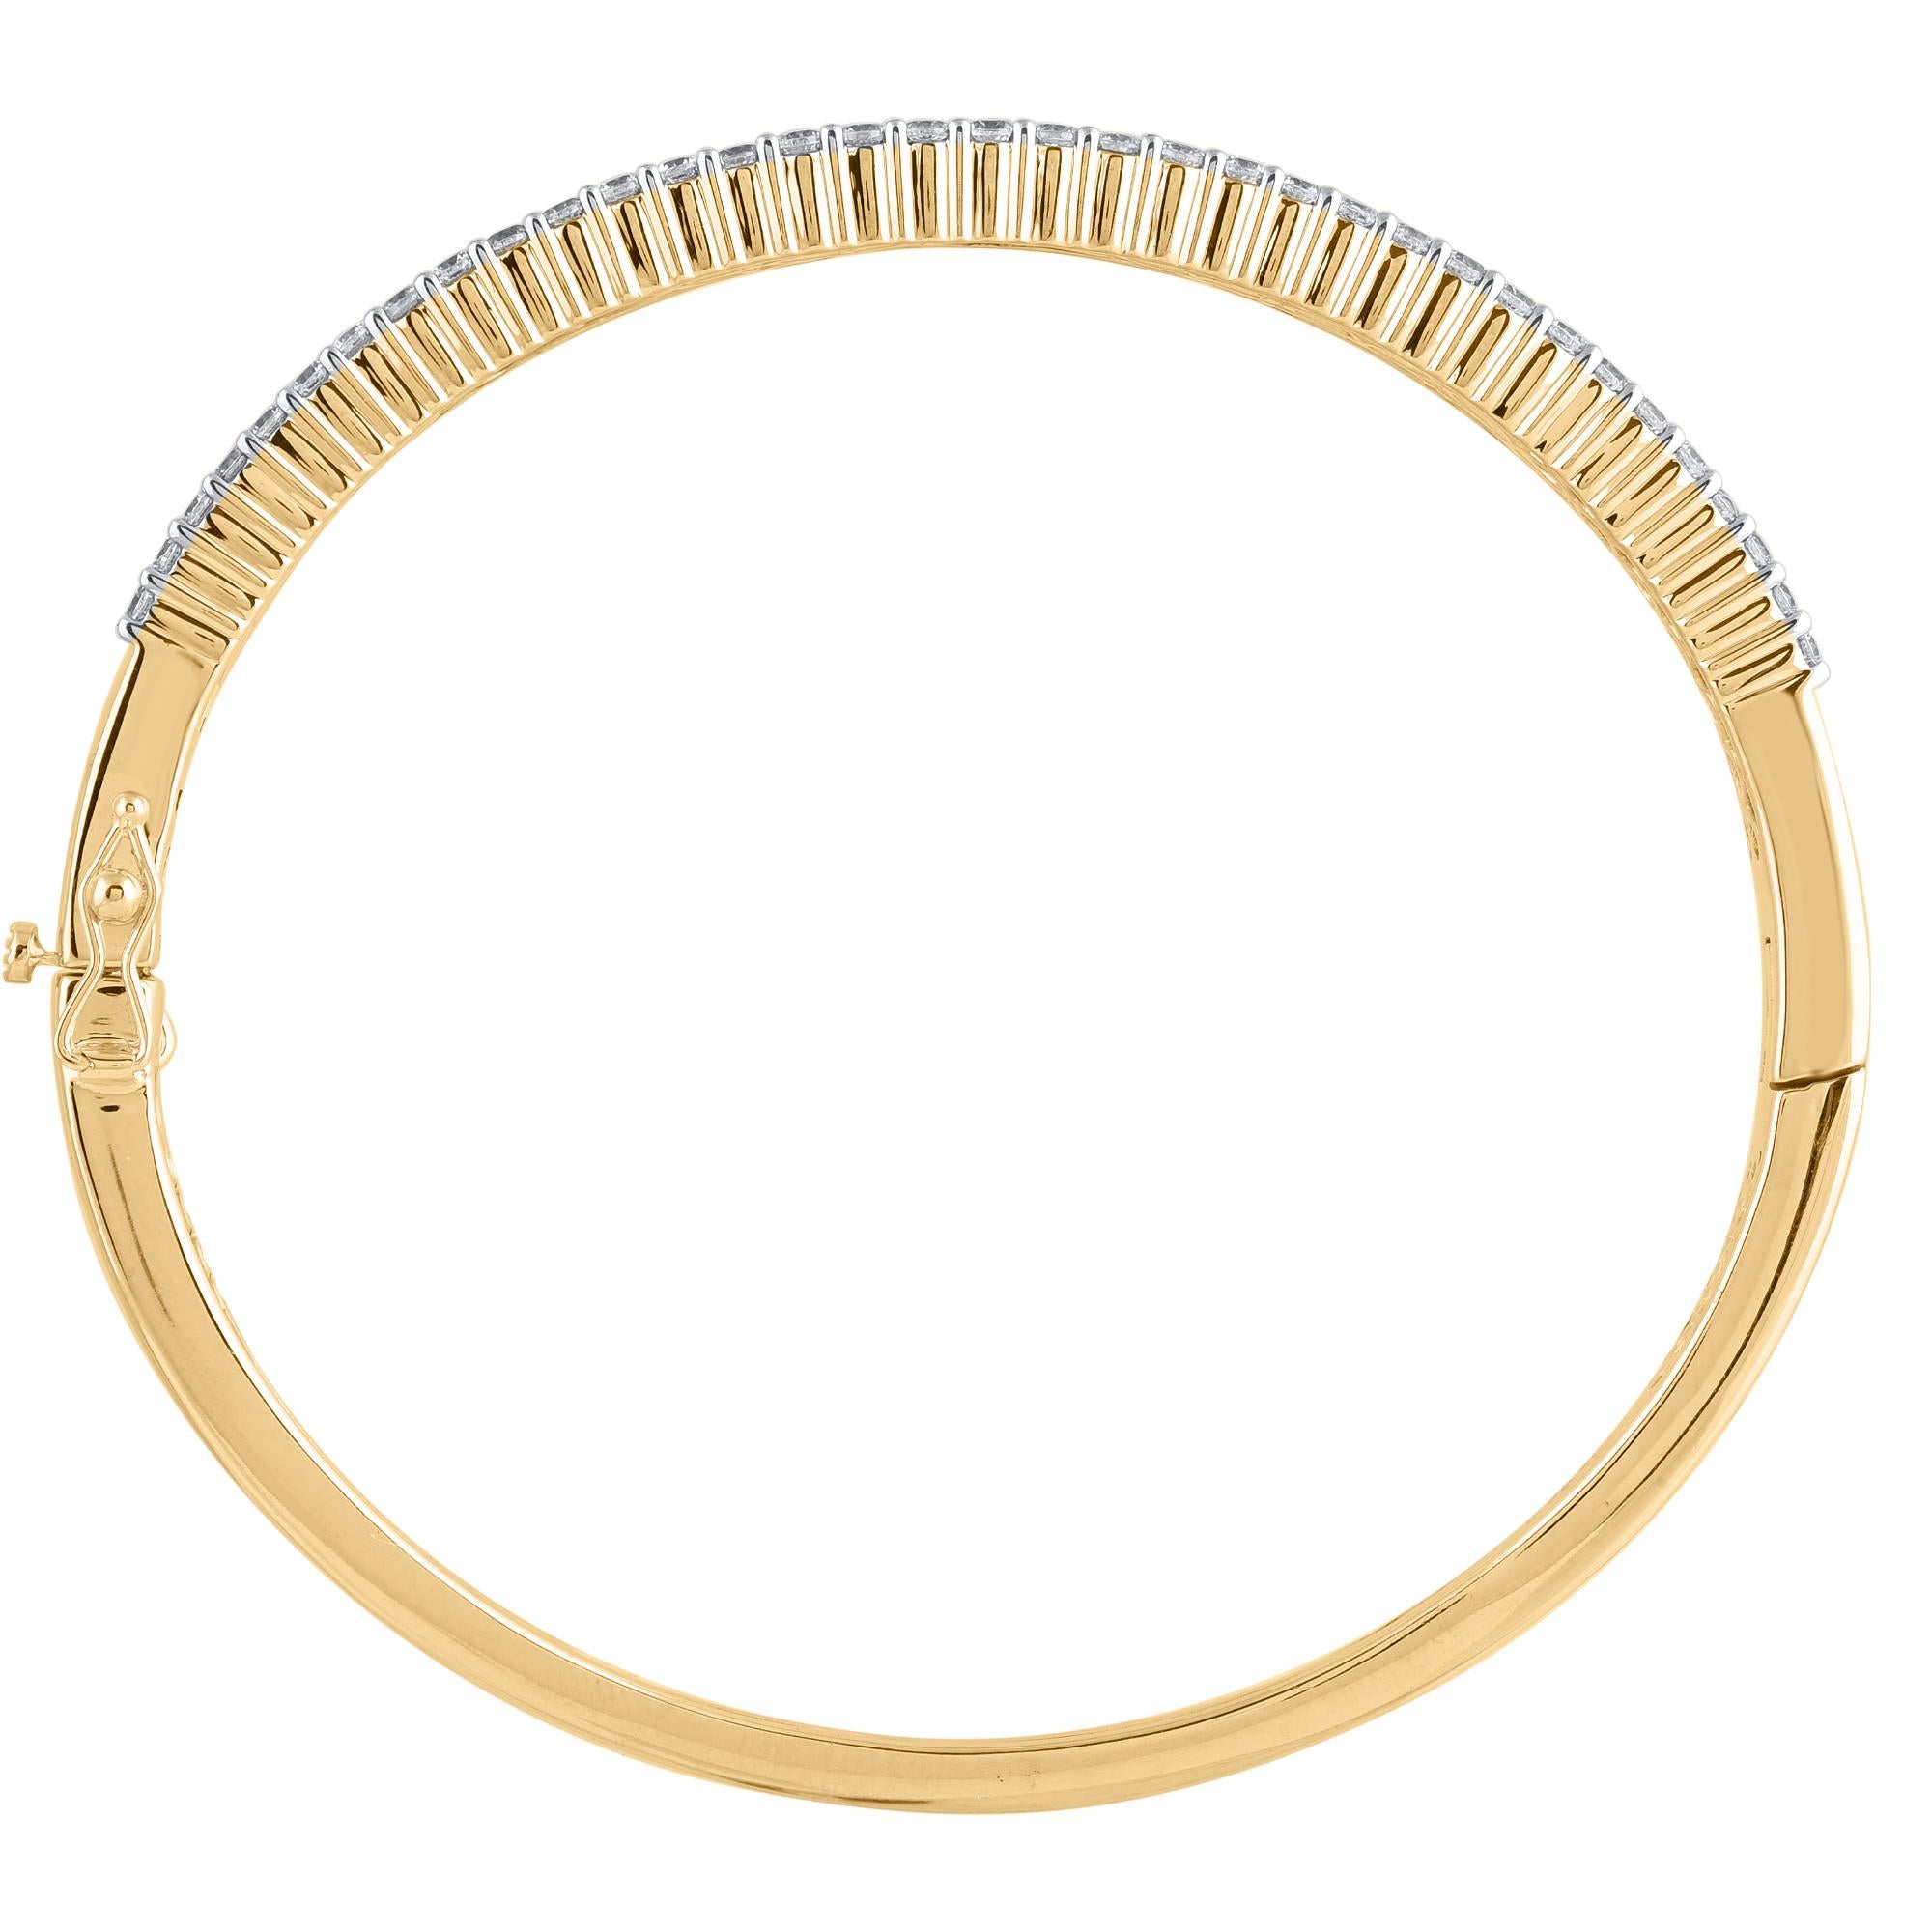 Modern TJD 5.0 Ct Natural Round & Baguette Diamond Bangle Bracelet in 14KT Yellow Gold For Sale